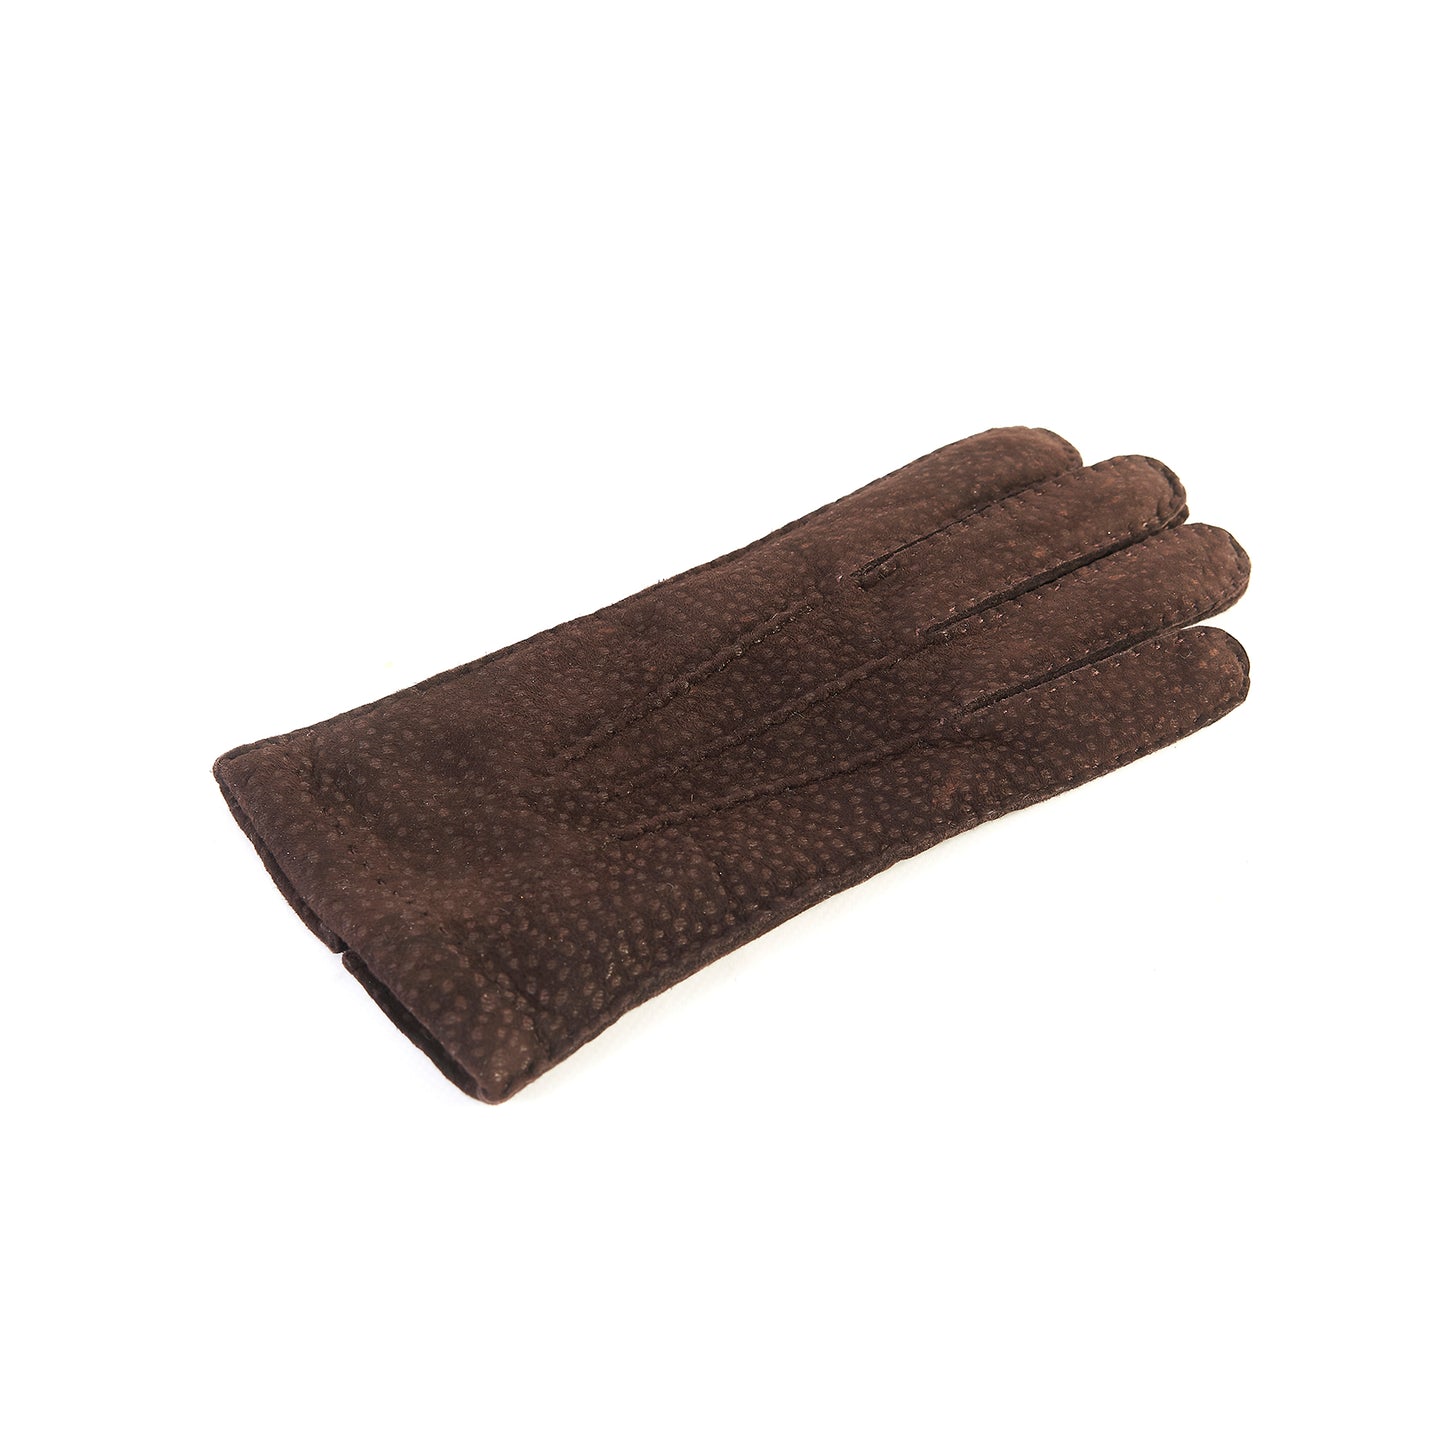 Men's hand-stitched brown carpincho gloves cashmere lined